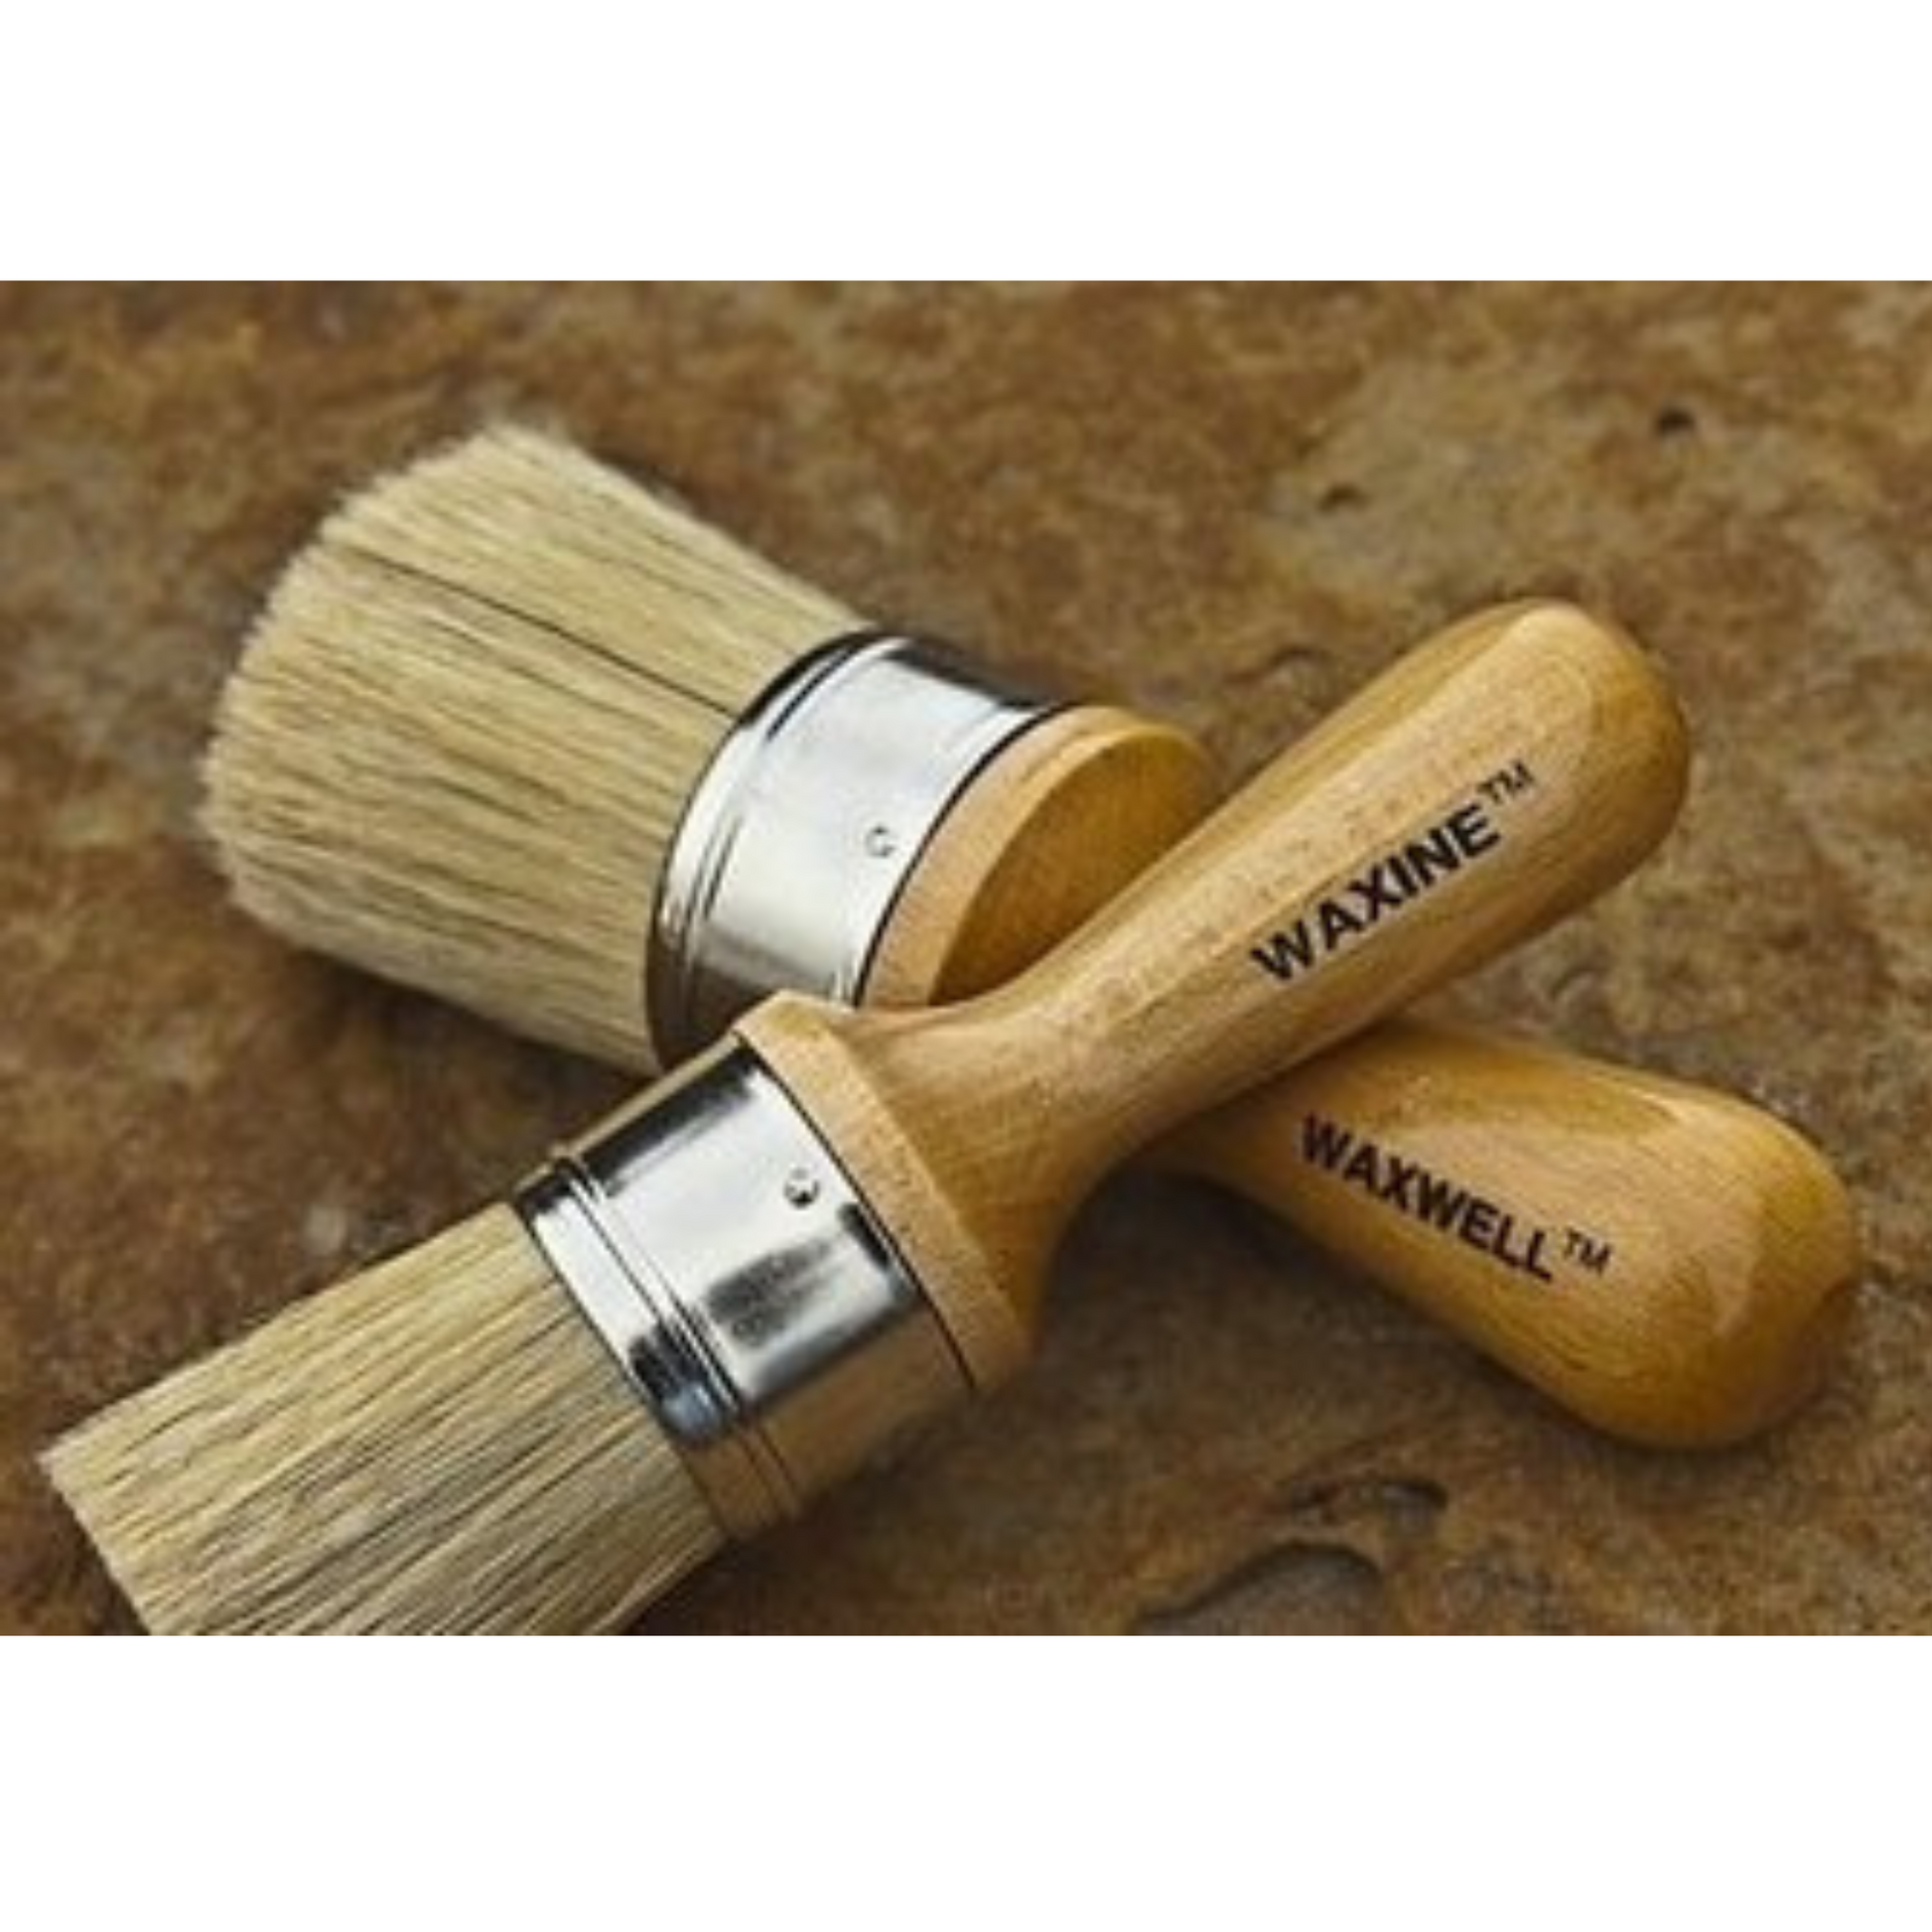 Waxine Wax Brush available at Milton's Daughter.